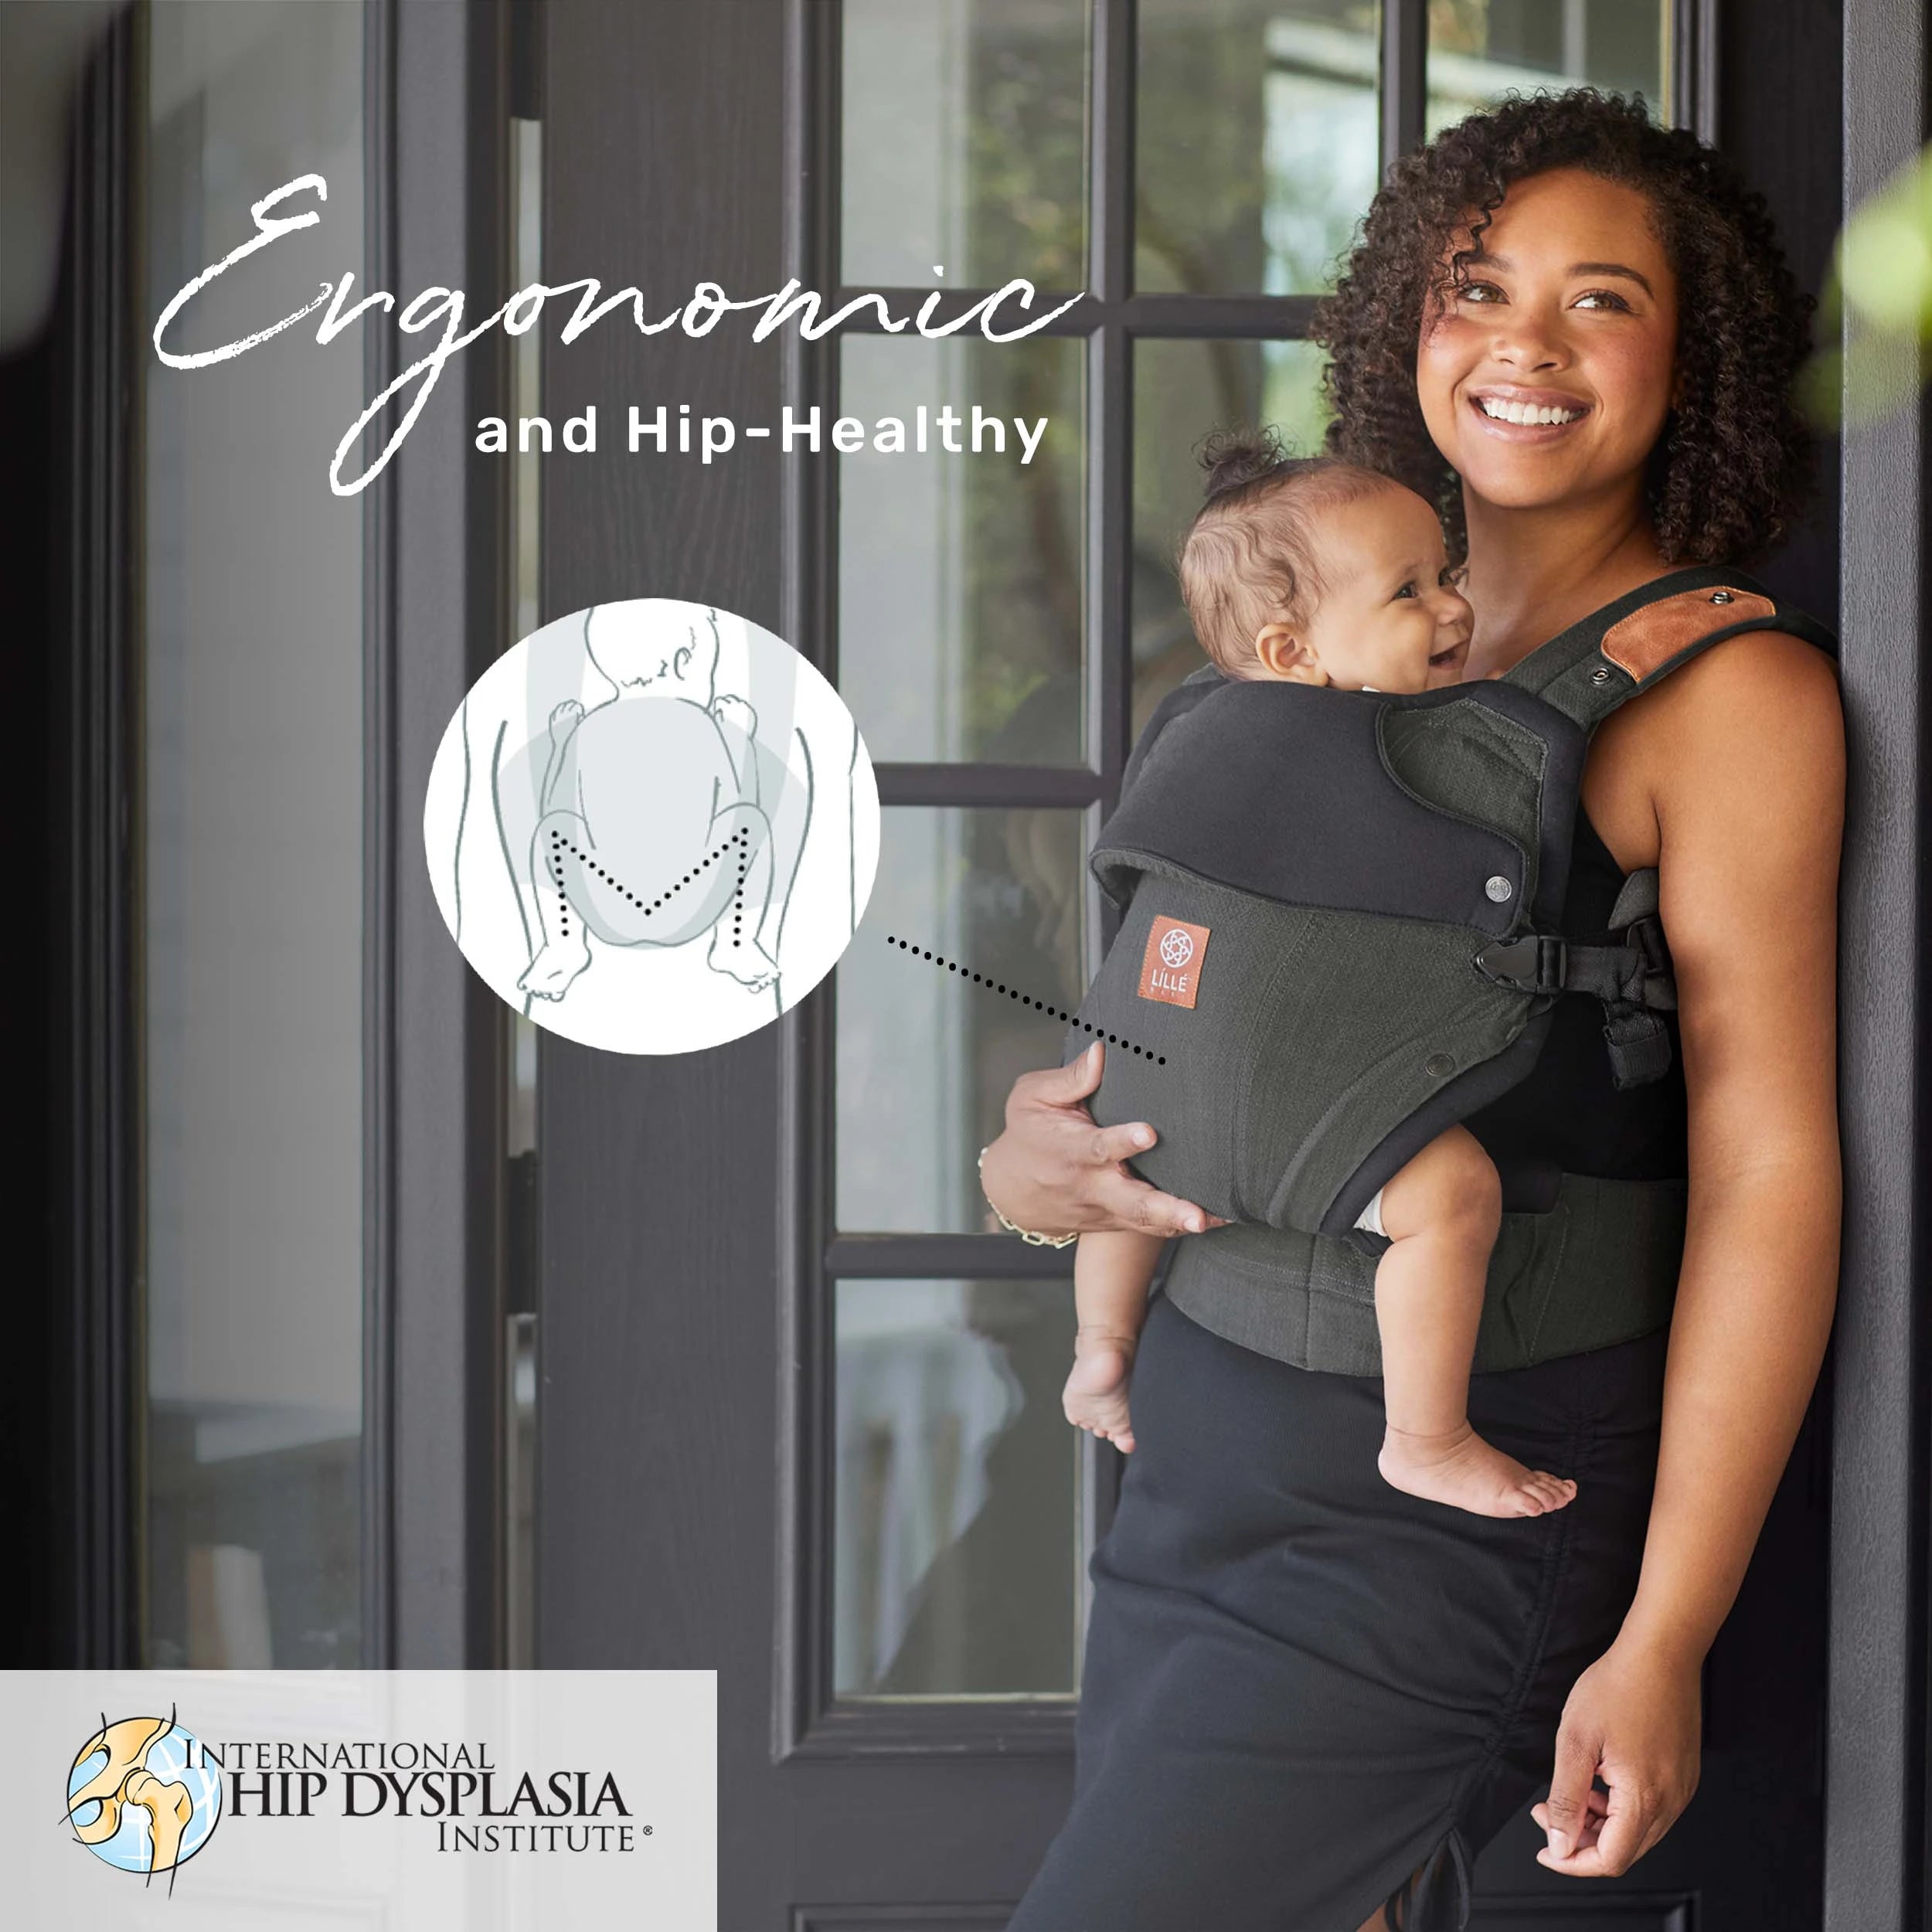  Elevate carrier images shows carrier support for baby. Ergonomic, hip healthy and endorsed by international hip dysplasia institute.